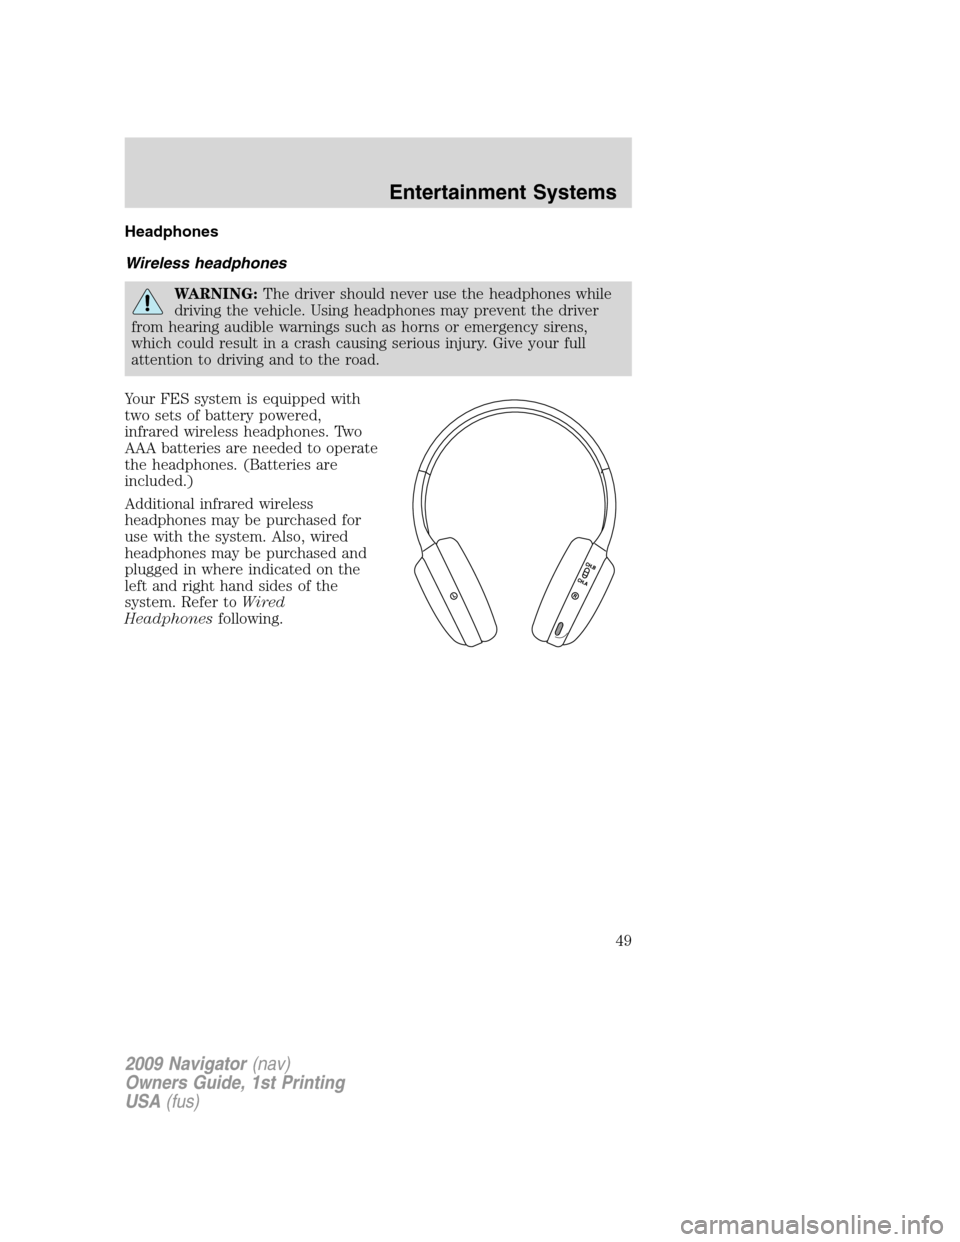 LINCOLN NAVIGATOR 2009 Service Manual Headphones
Wireless headphones
WARNING:The driver should never use the headphones while
driving the vehicle. Using headphones may prevent the driver
from hearing audible warnings such as horns or emer